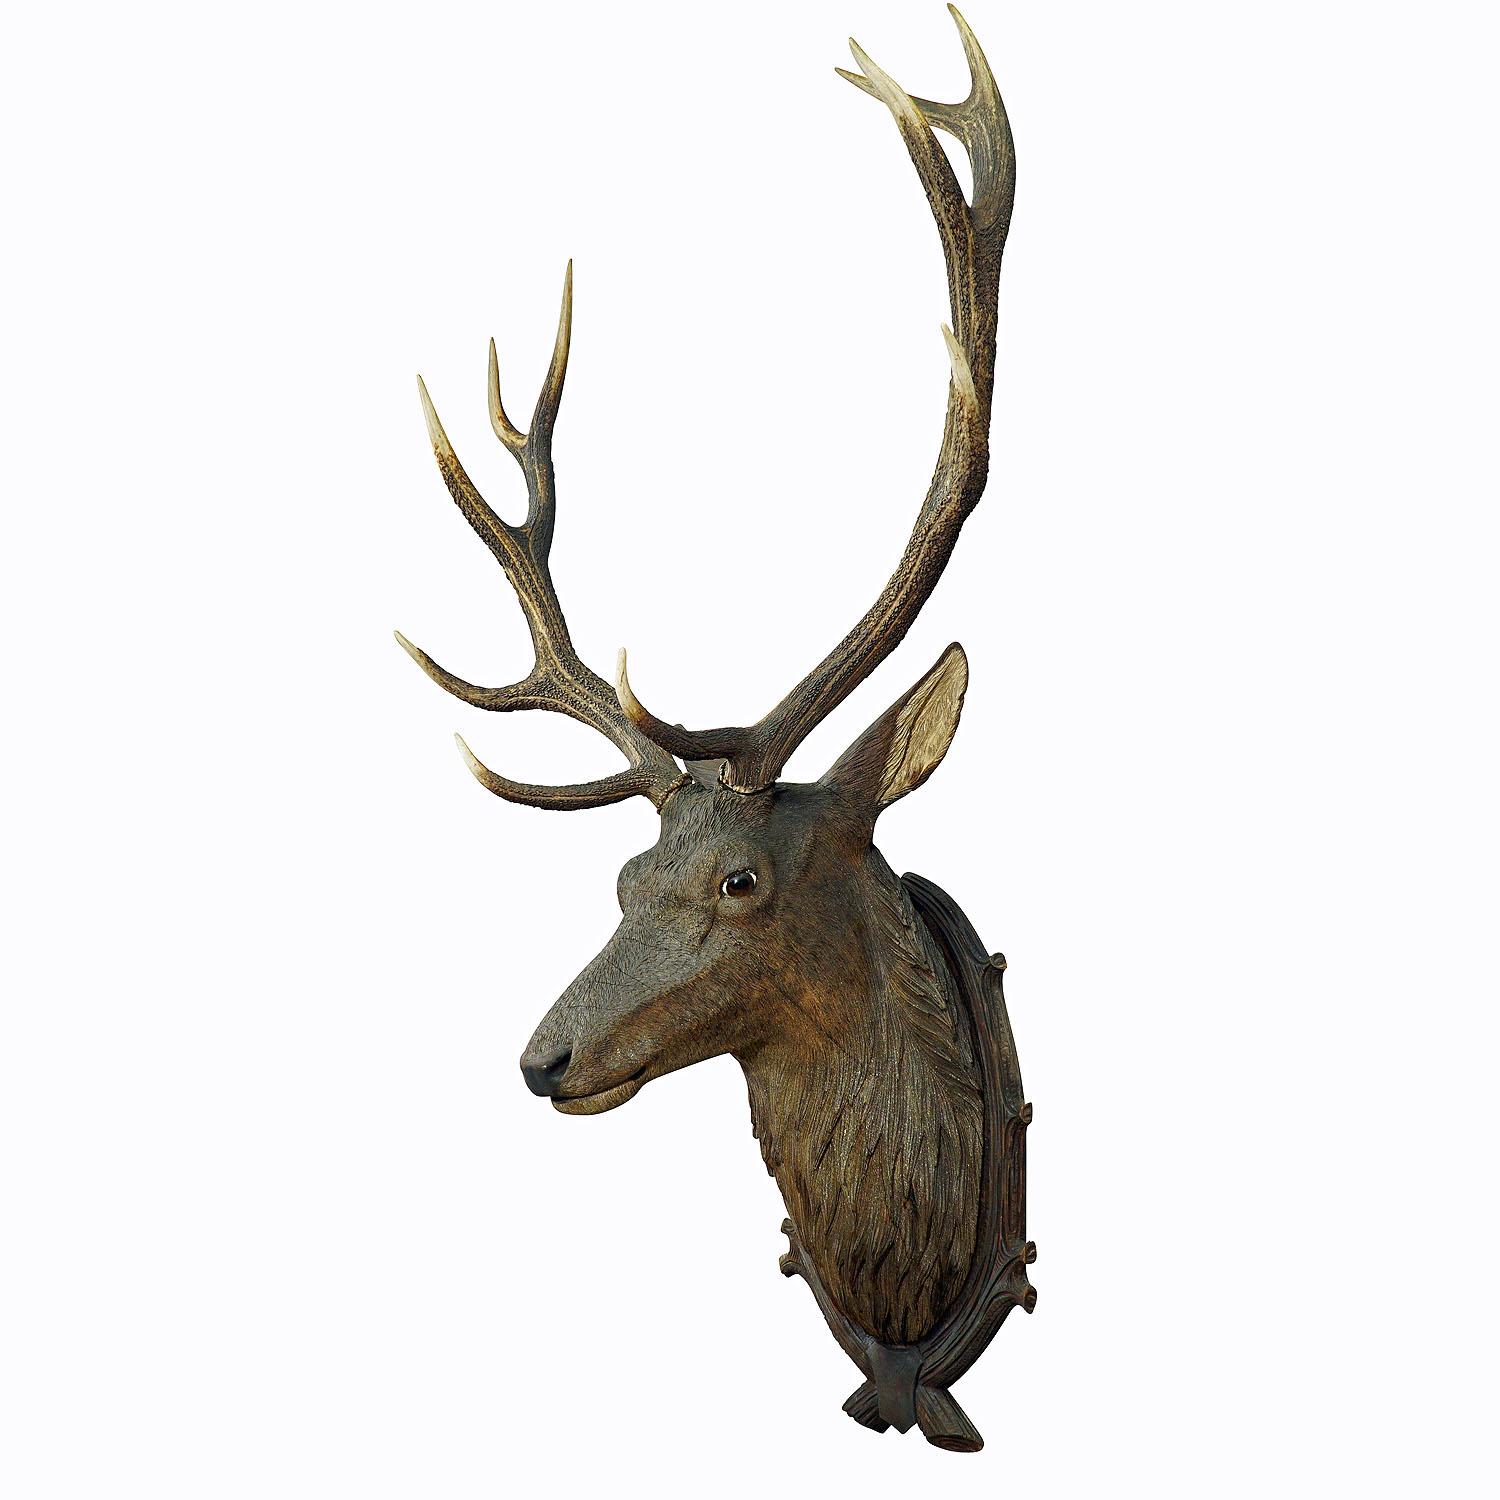 A large impressive Black Forest stag head, handcarved in Austria ca. 1900. Mounted on a wooden carved wall plaque and with a large pair of real deer antlers. Handcarved in the area of Ebensee, Austria by one of the famous woodcarvers of this region